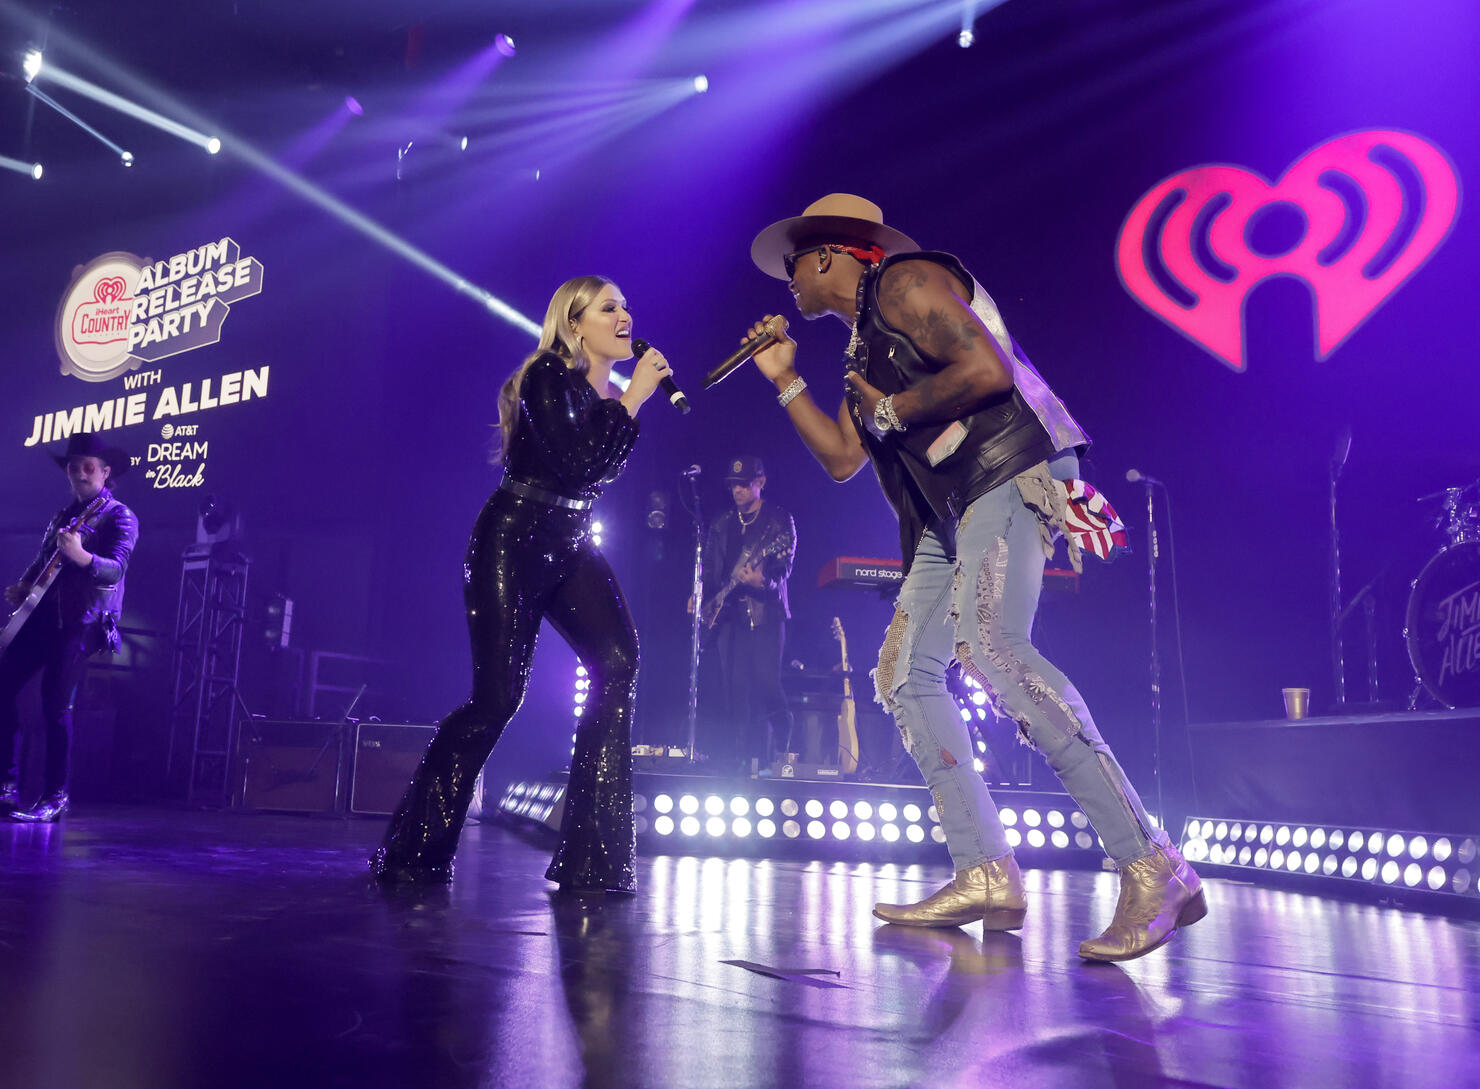 iHeartCountry Album Release Party With Jimmie Allen Presented By AT&T Dream In Black